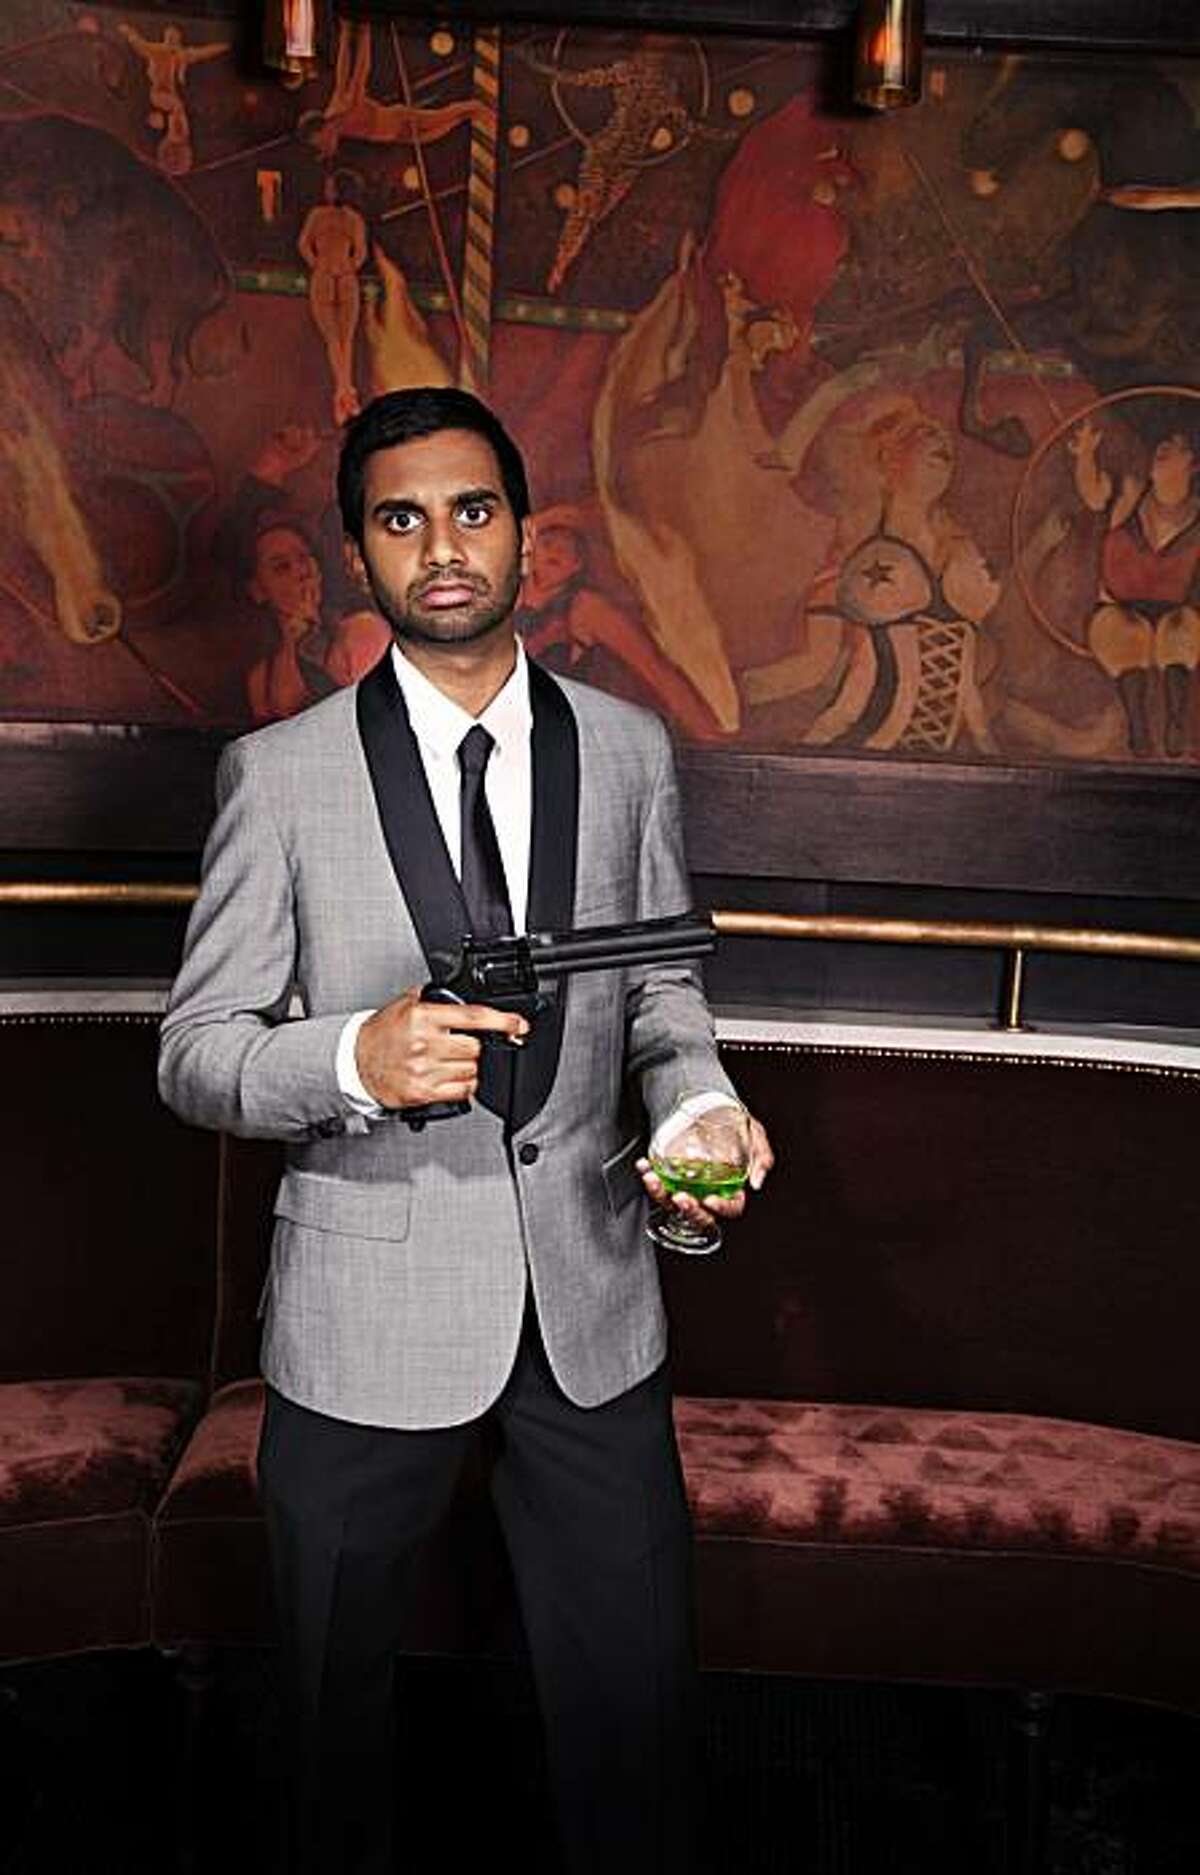 Aziz Ansari, a popular stand-up comic and star of NBCs "Parks and Recreation," sold out multiple shows at the Fillmore Auditorium.